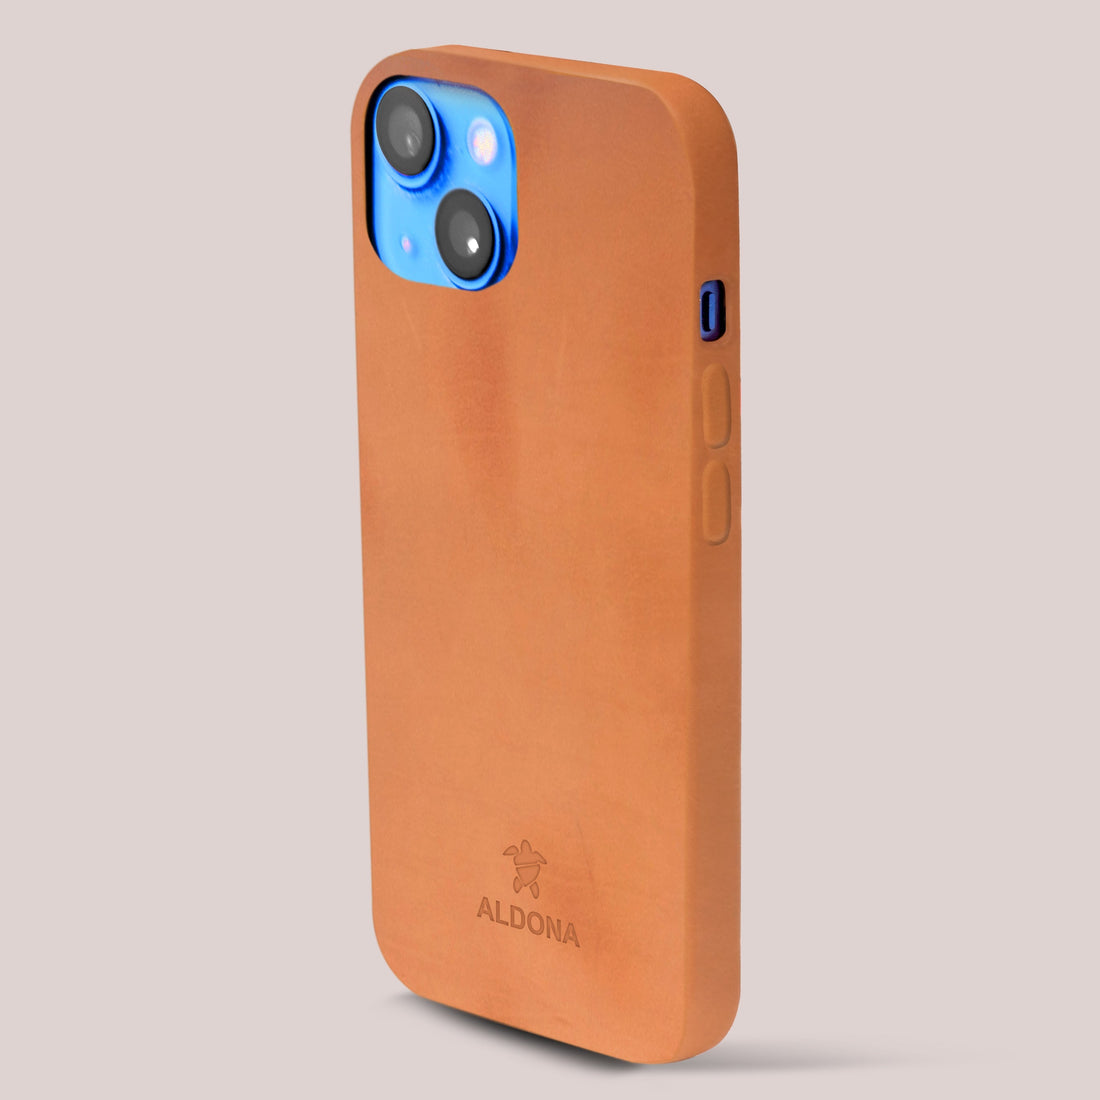 Kalon Case for iPhone 12 with MagSafe Compatibility - Cognac